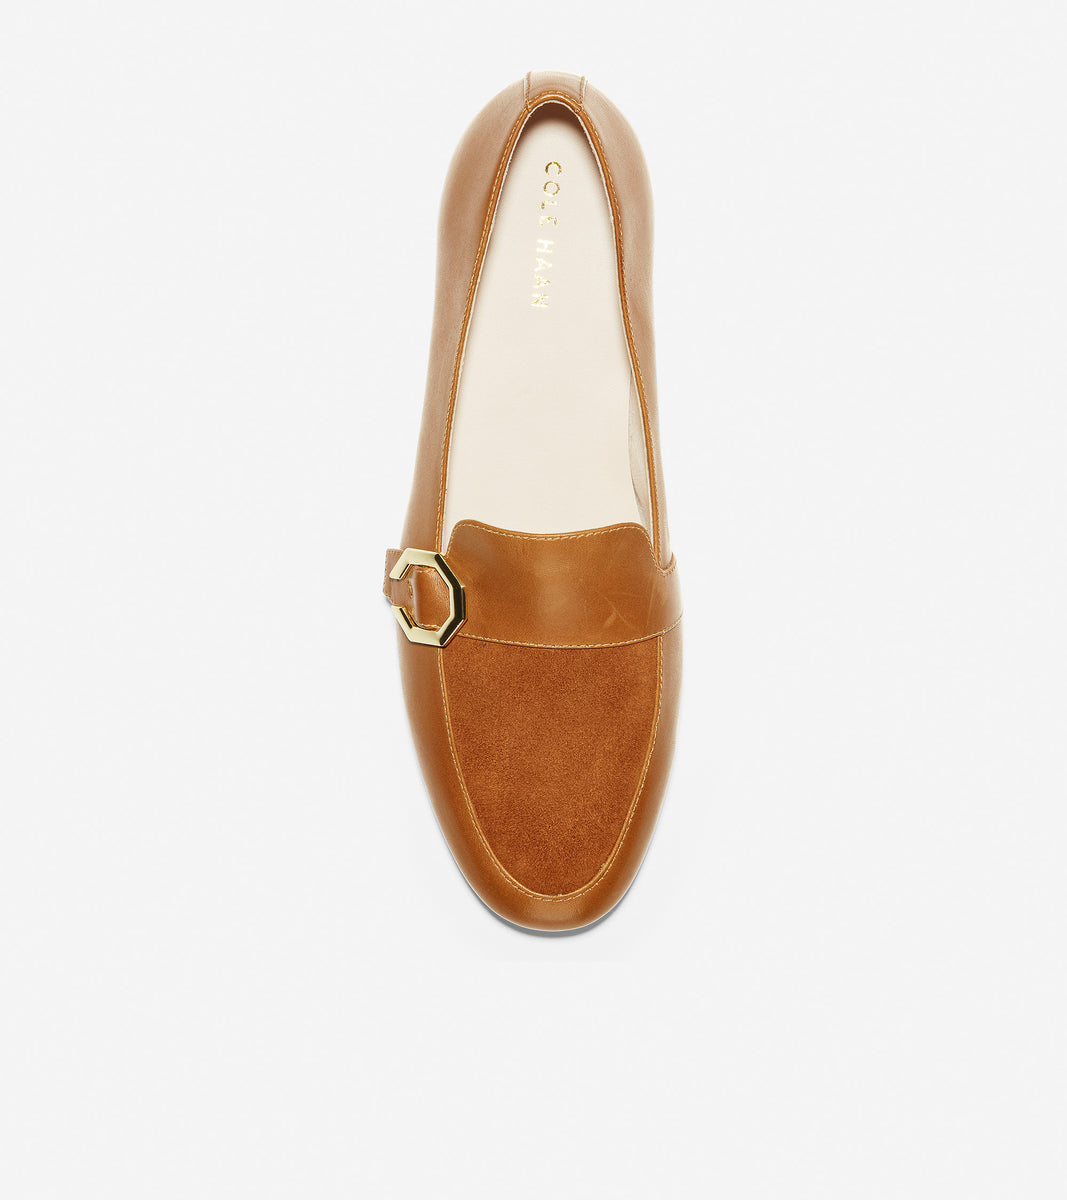 ColeHaan-Teresa Loafer-w15863-British Tan Leather-Suede